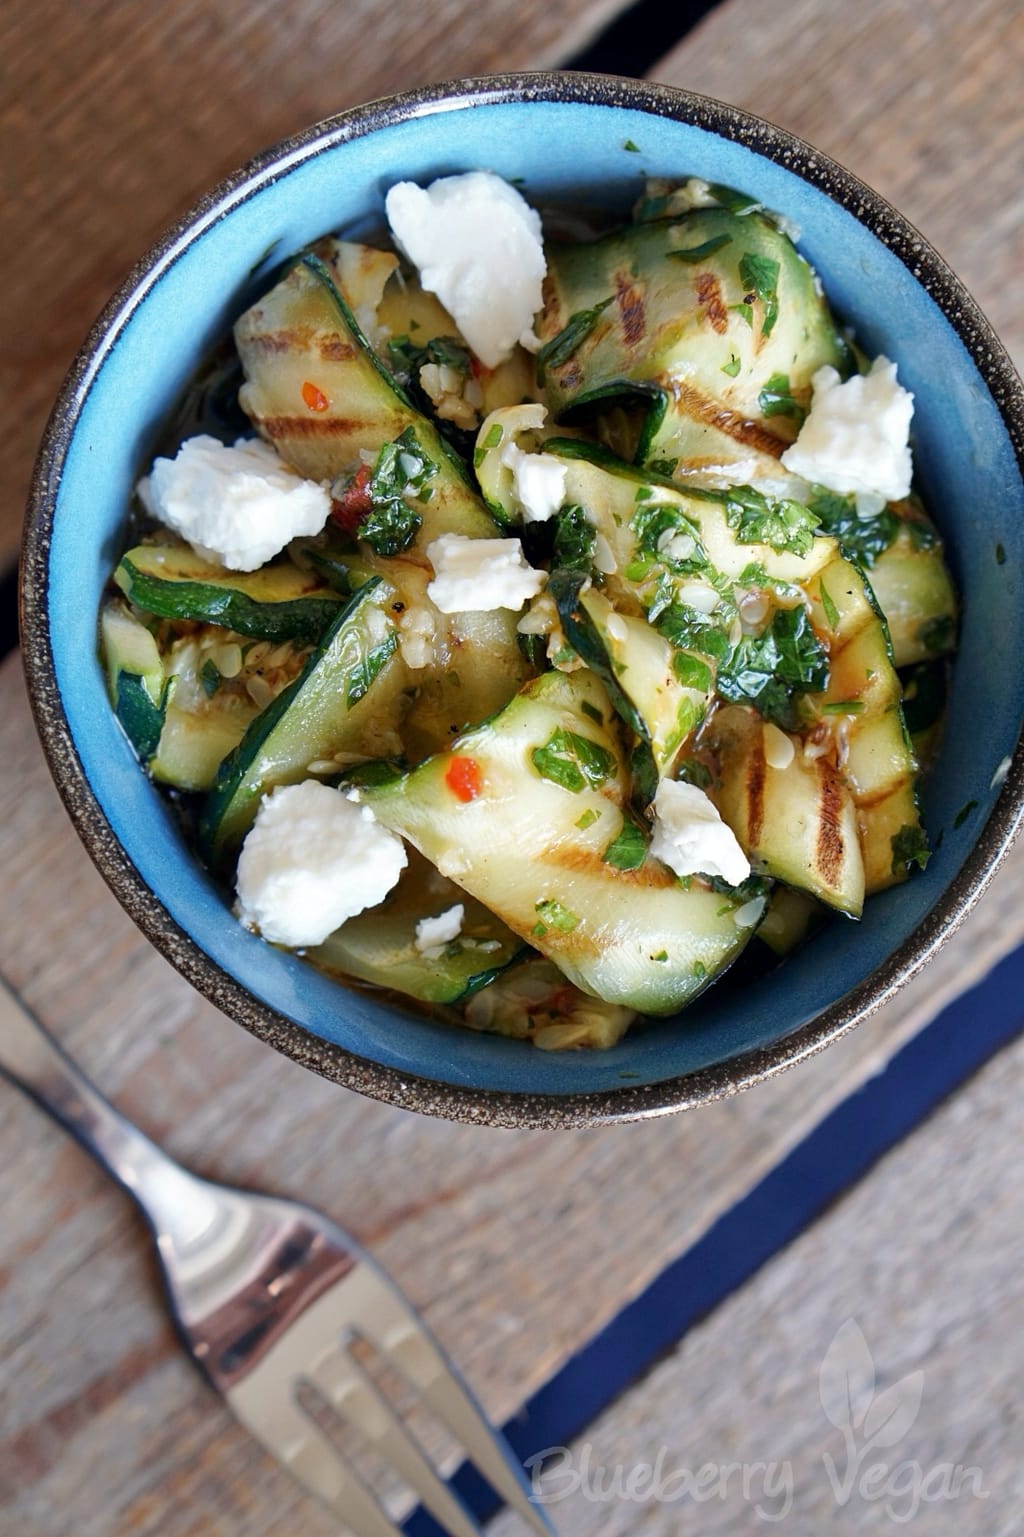 Tangy Salad with Grilled Zucchini